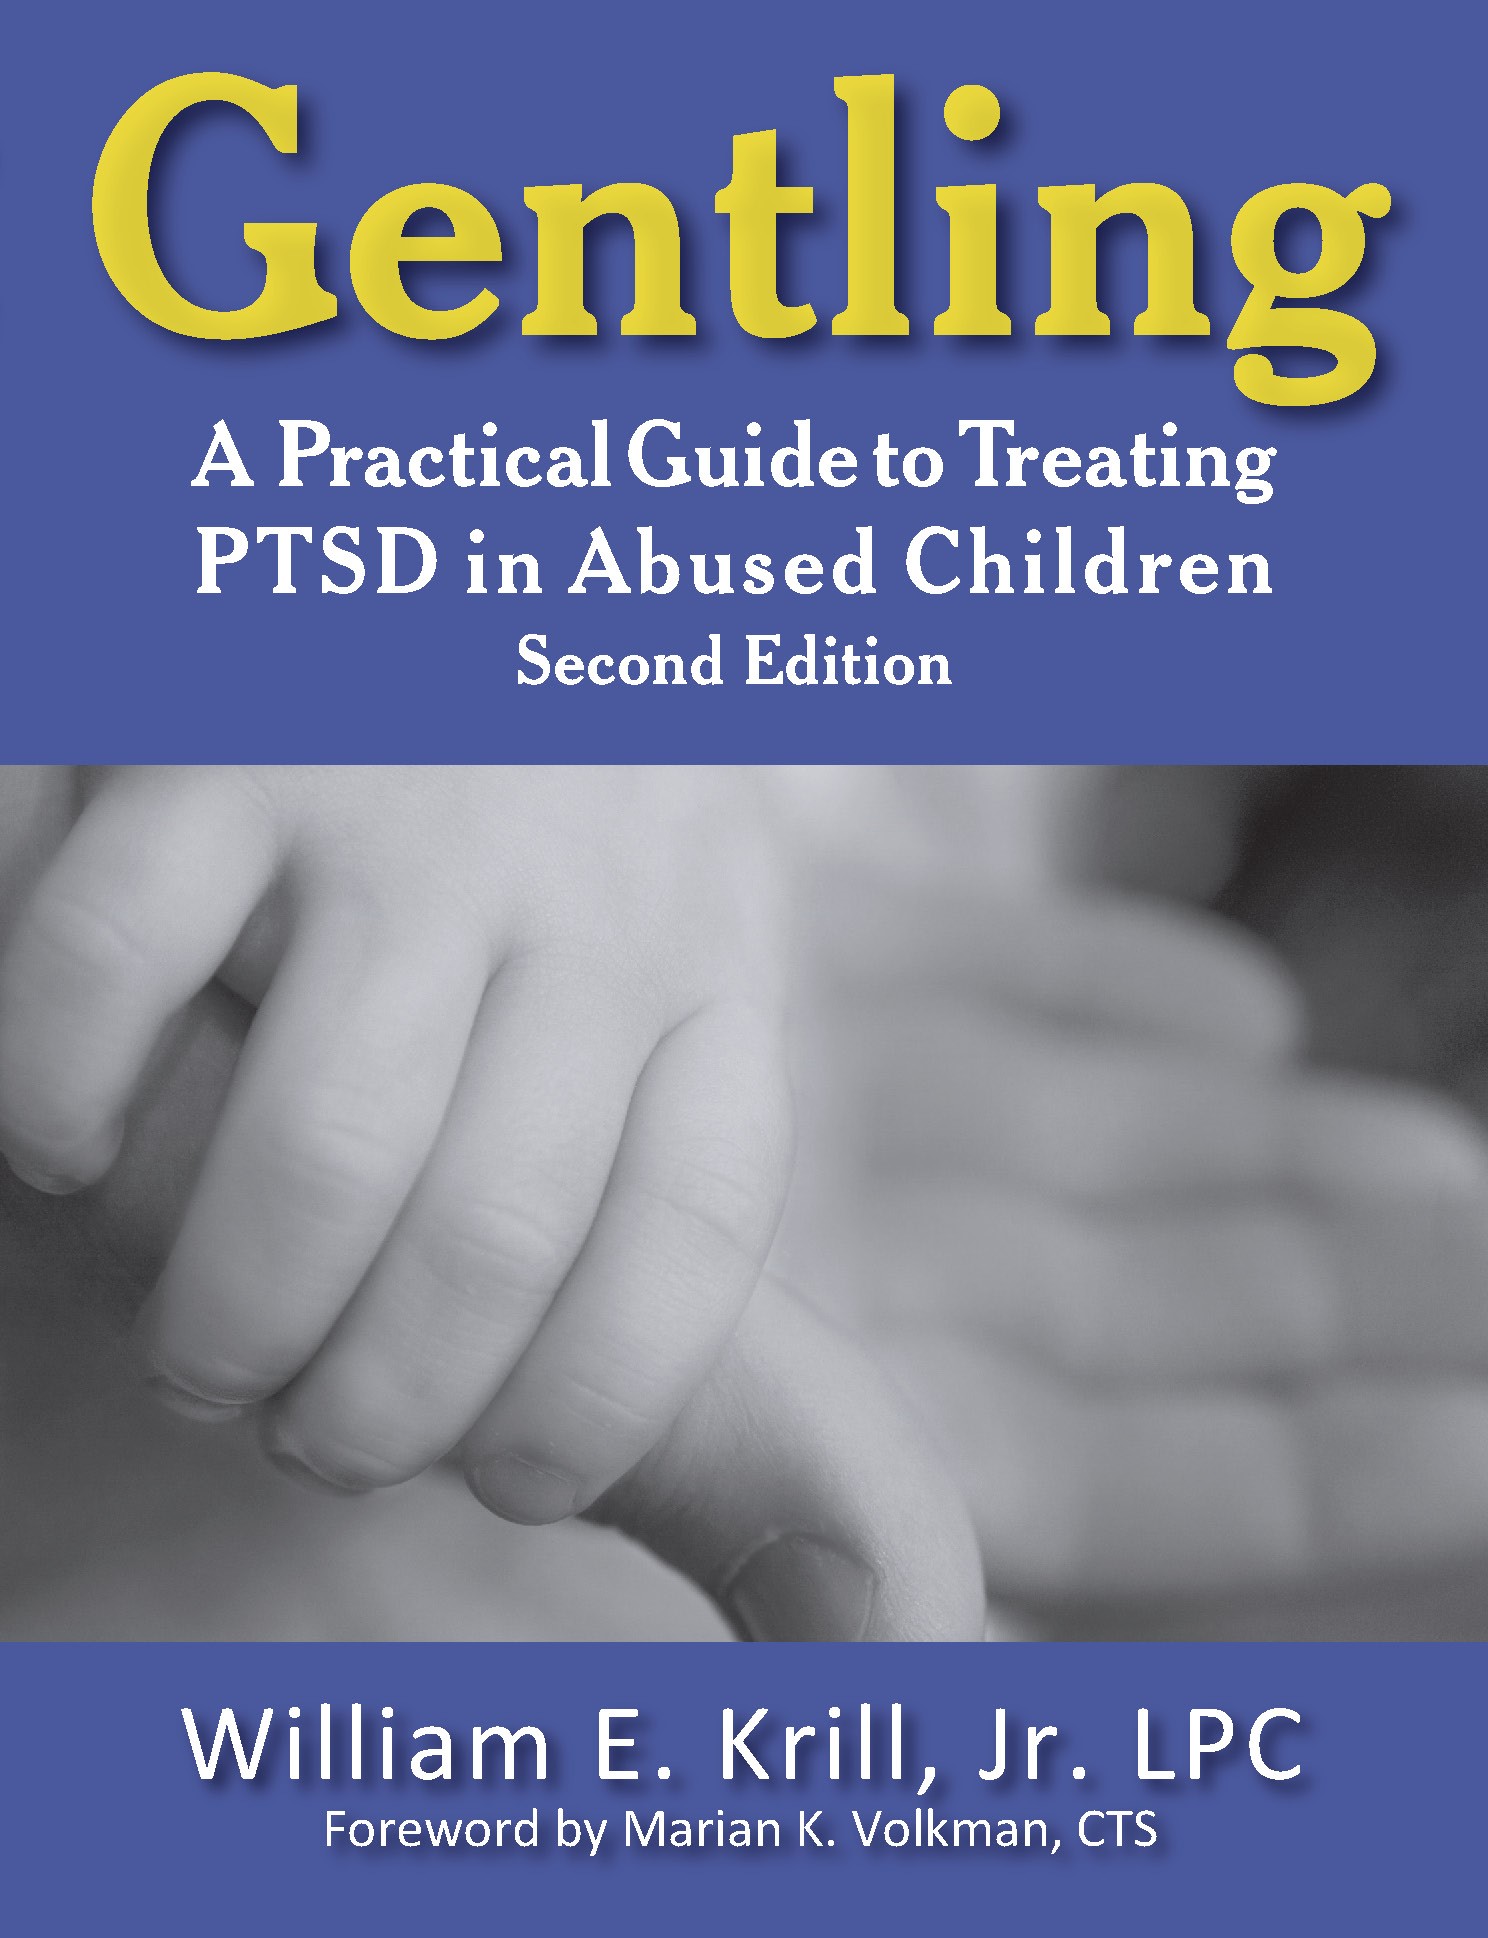 Gentling: A Practical Guide to Treating PTSD in Abused Children, 2nd Edition